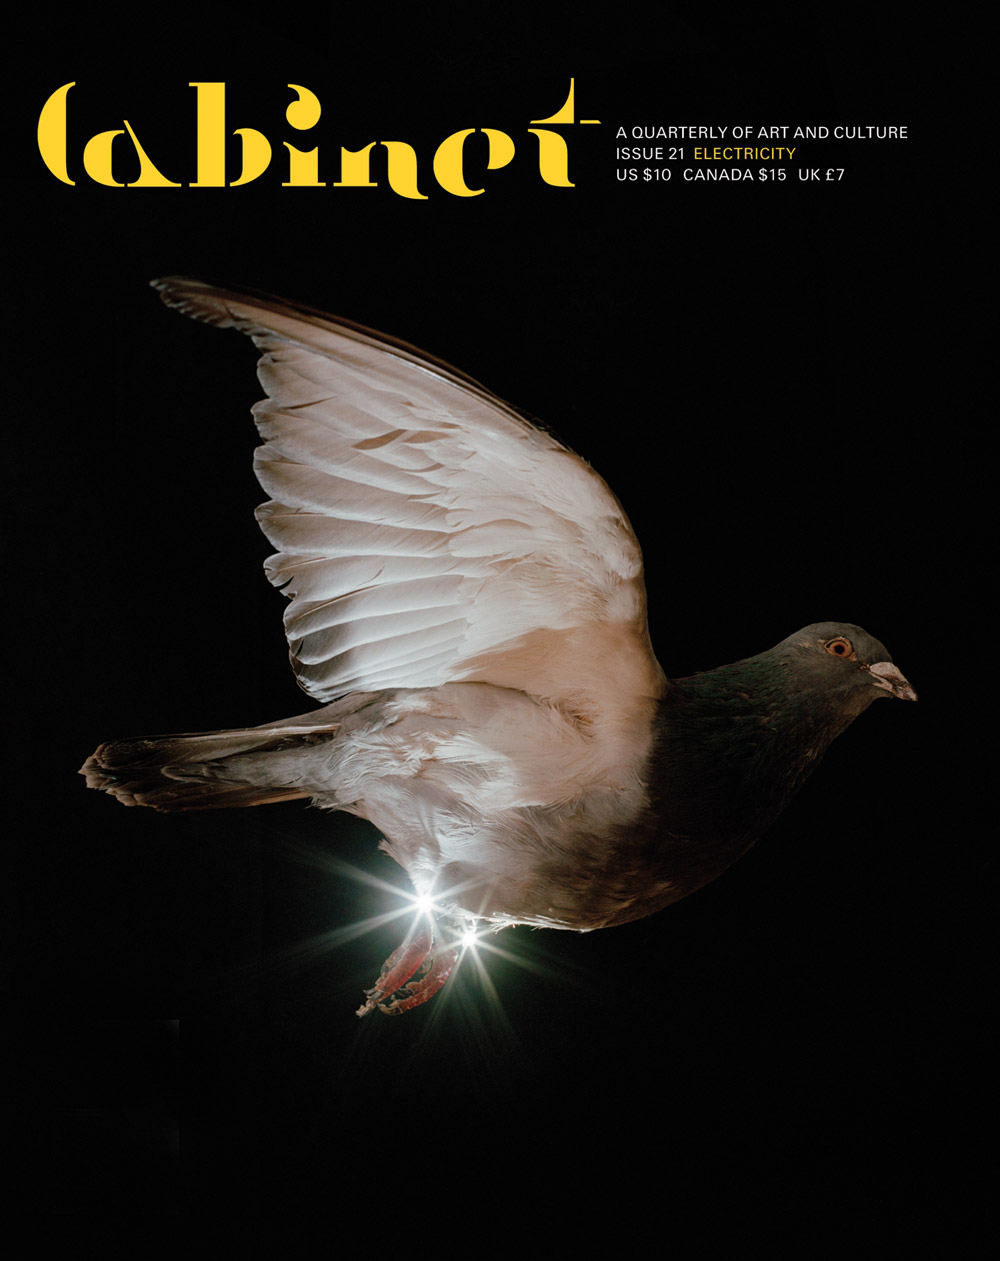 A 2005 photograph by artist Jasper van den Brink depicting a pigeon flying at night with lights attached to its feet.